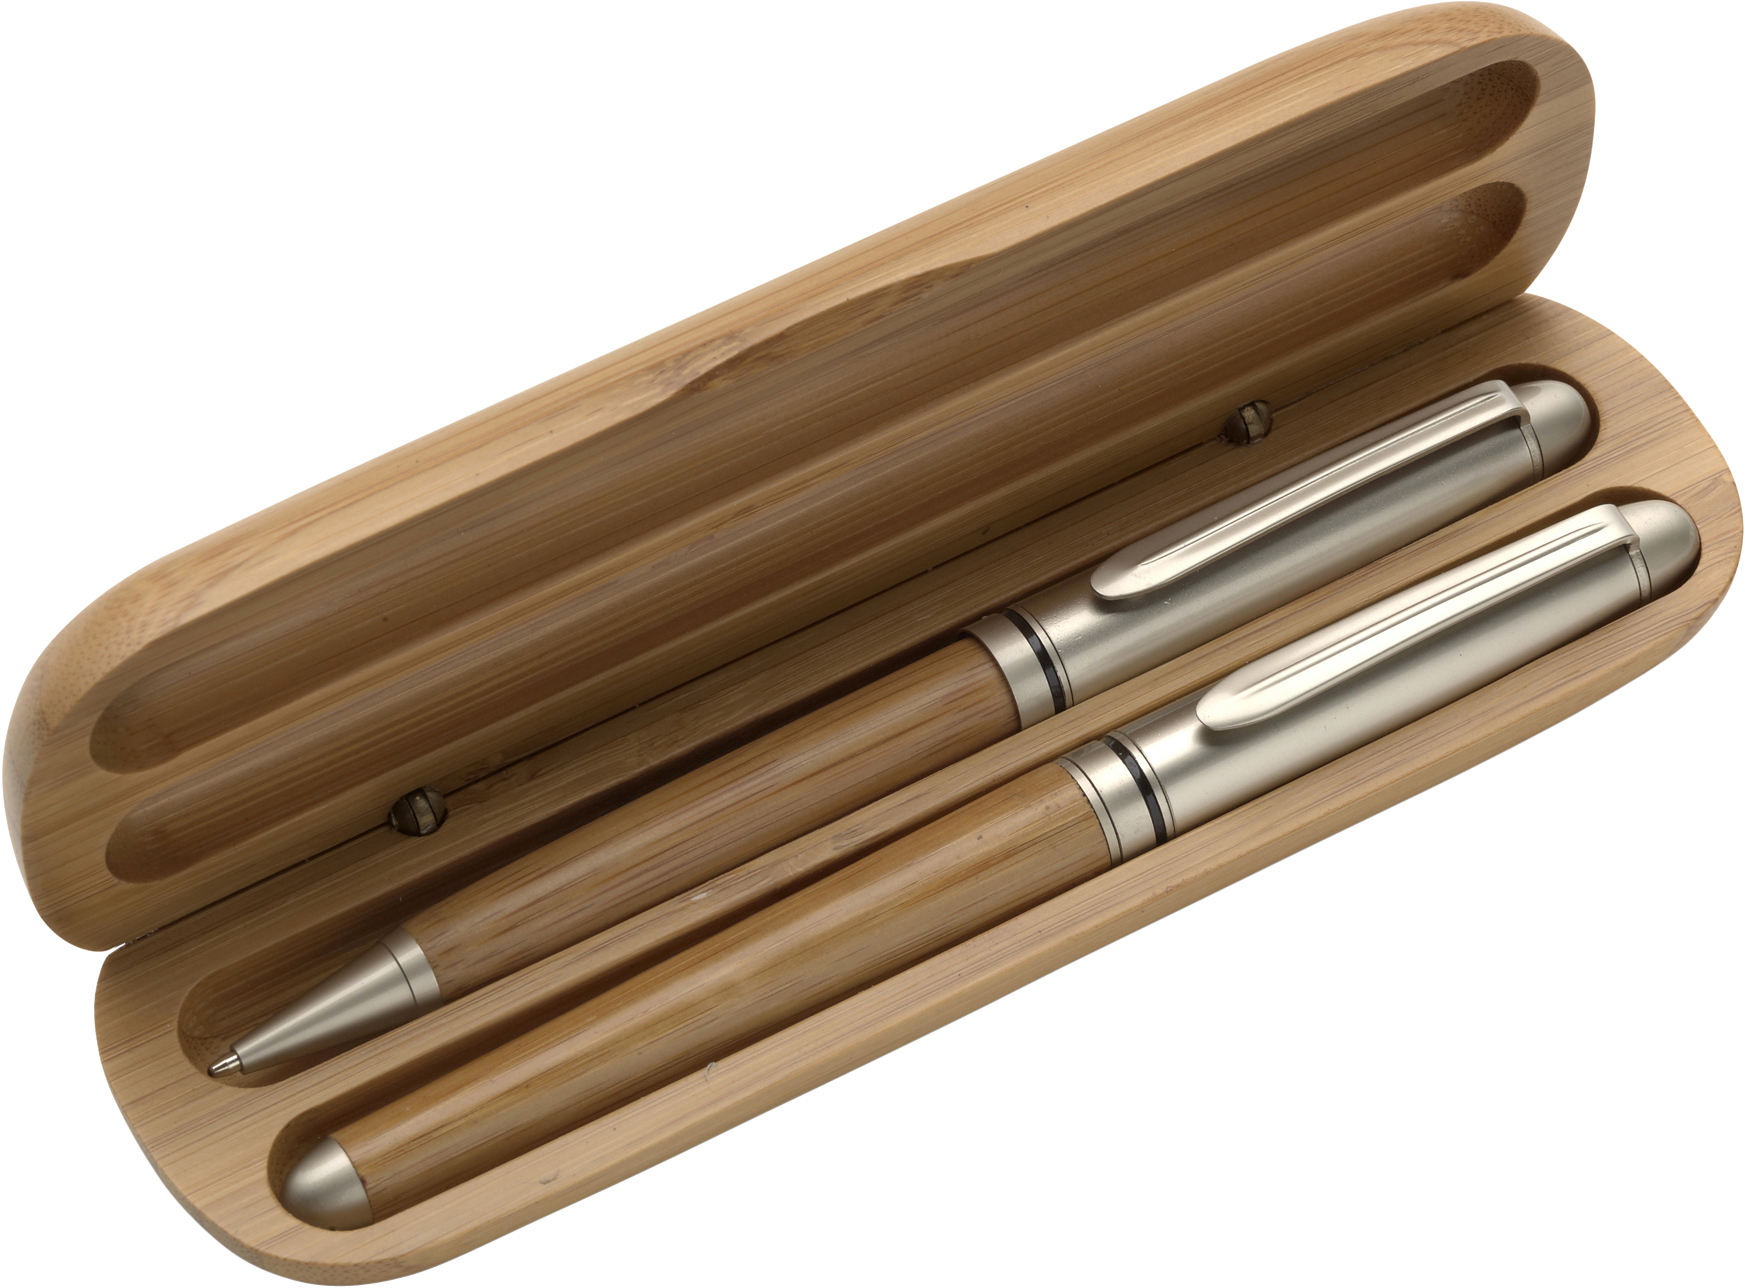 Branded Pen set made from bamboo